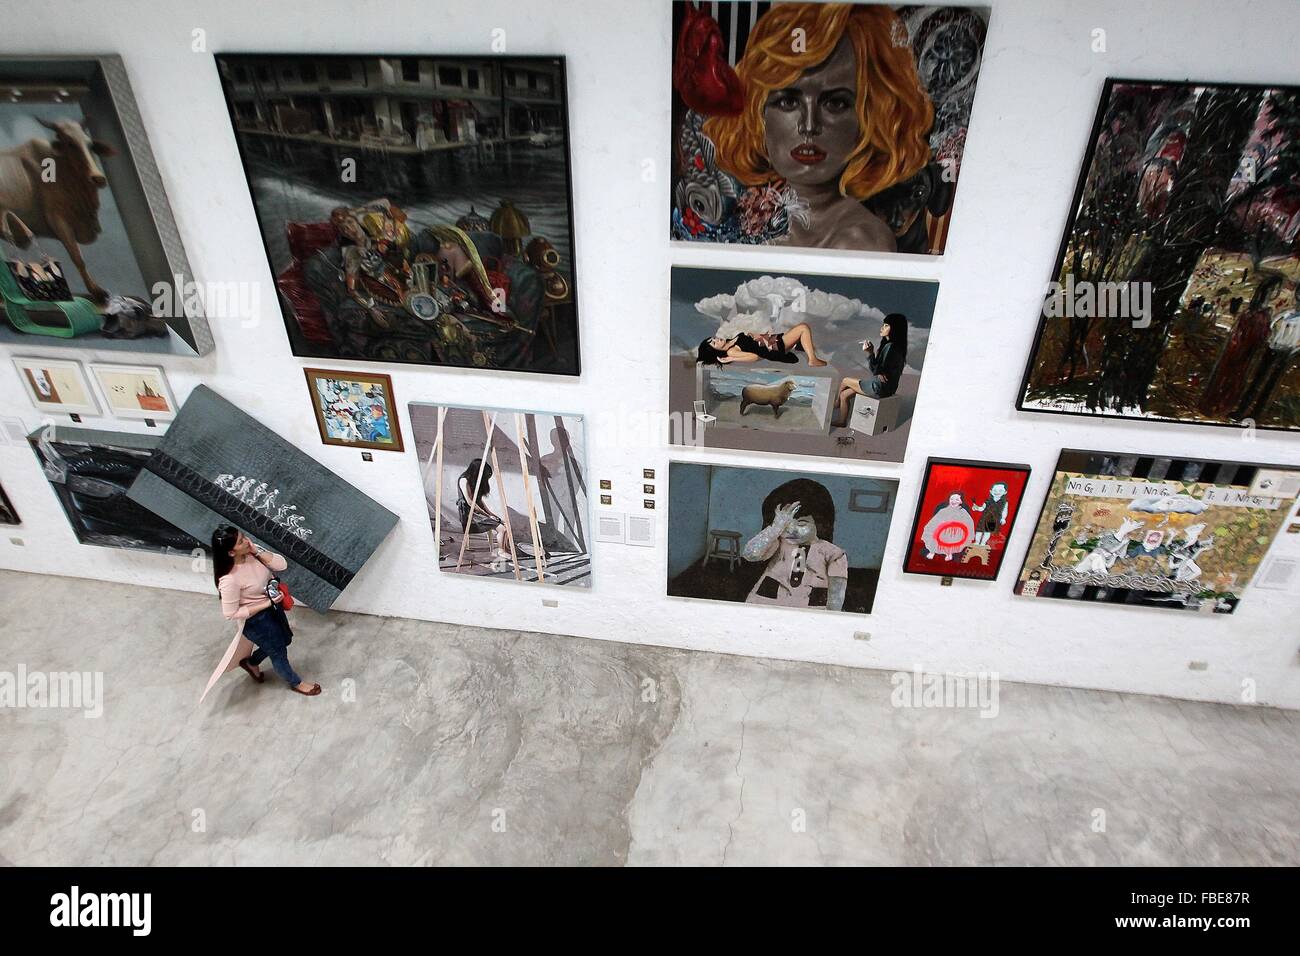 Rizal Province, Philippines. 15th Jan, 2016. A visitor looks at artworks inside the Pinto Art Museum in Rizal Province, the Philippines, Jan. 15, 2016. The Pinto Art Museum exhibits more than 300 modern paintings, sculptures, and art installations by various local artists. © Rouelle Umali/Xinhua/Alamy Live News Stock Photo